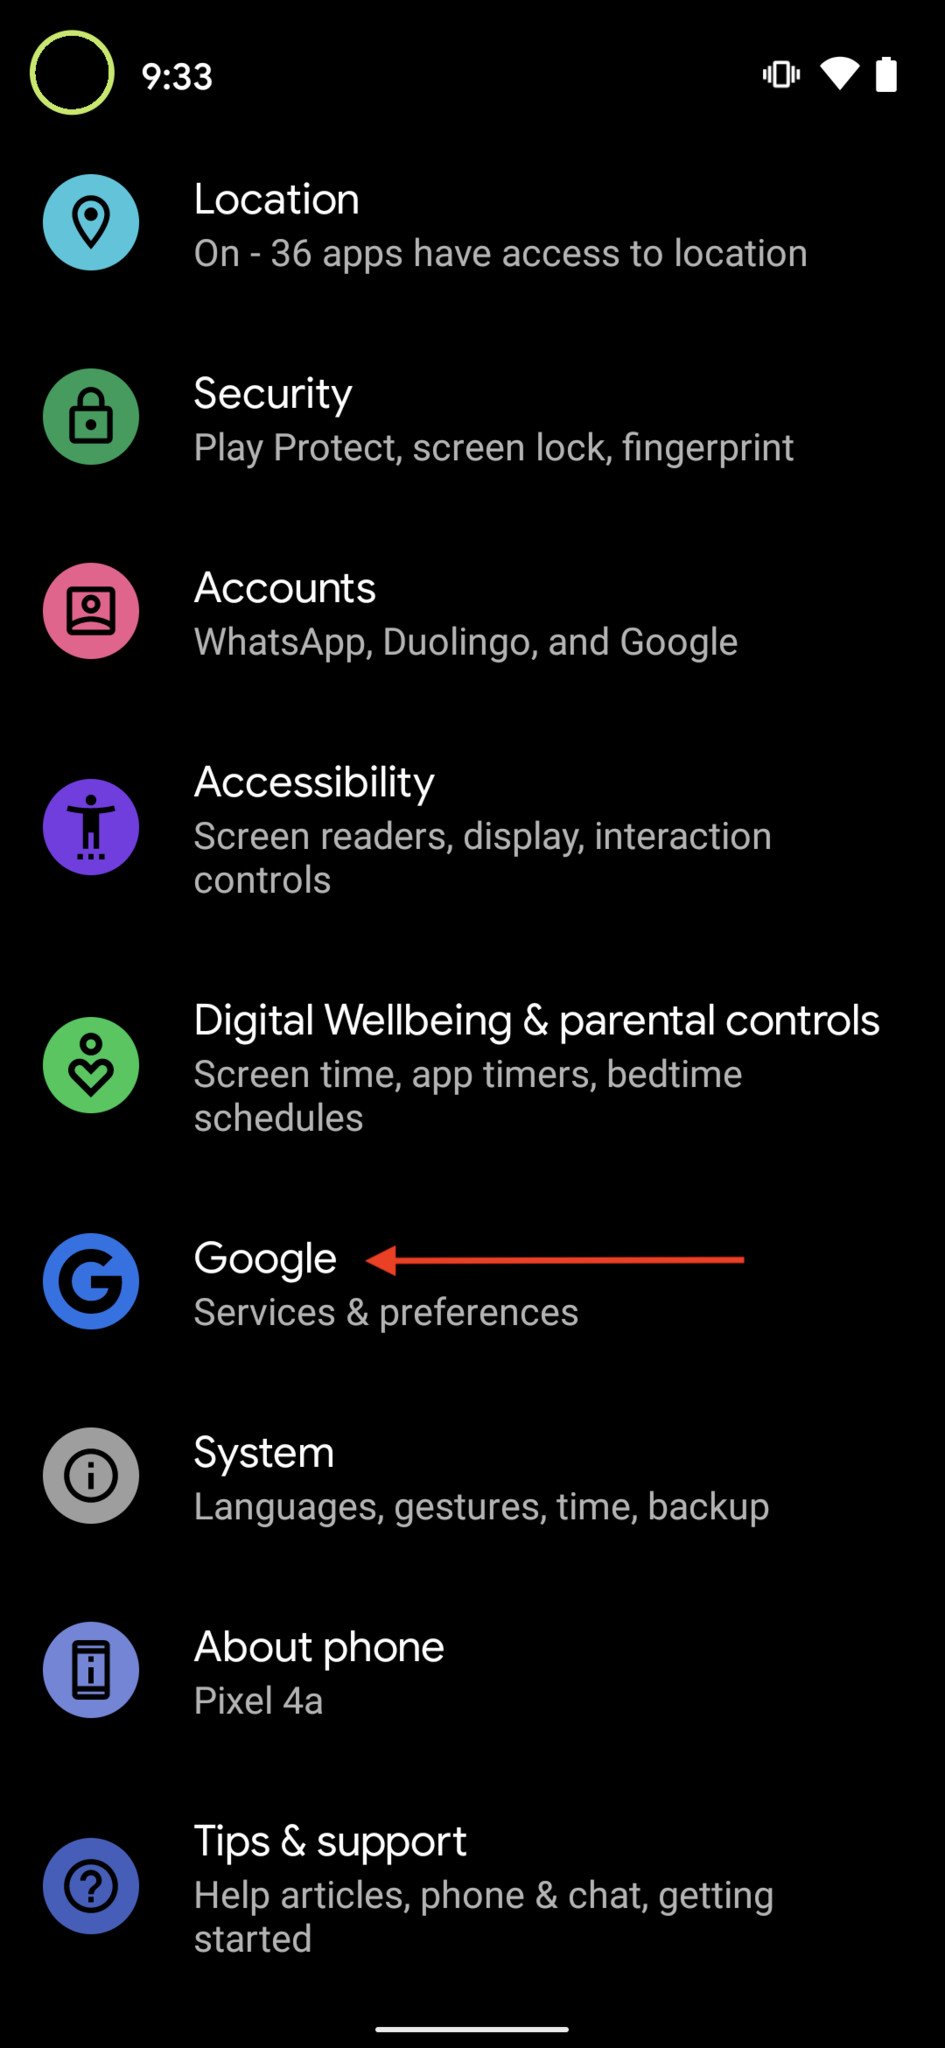 how to set up a new google account